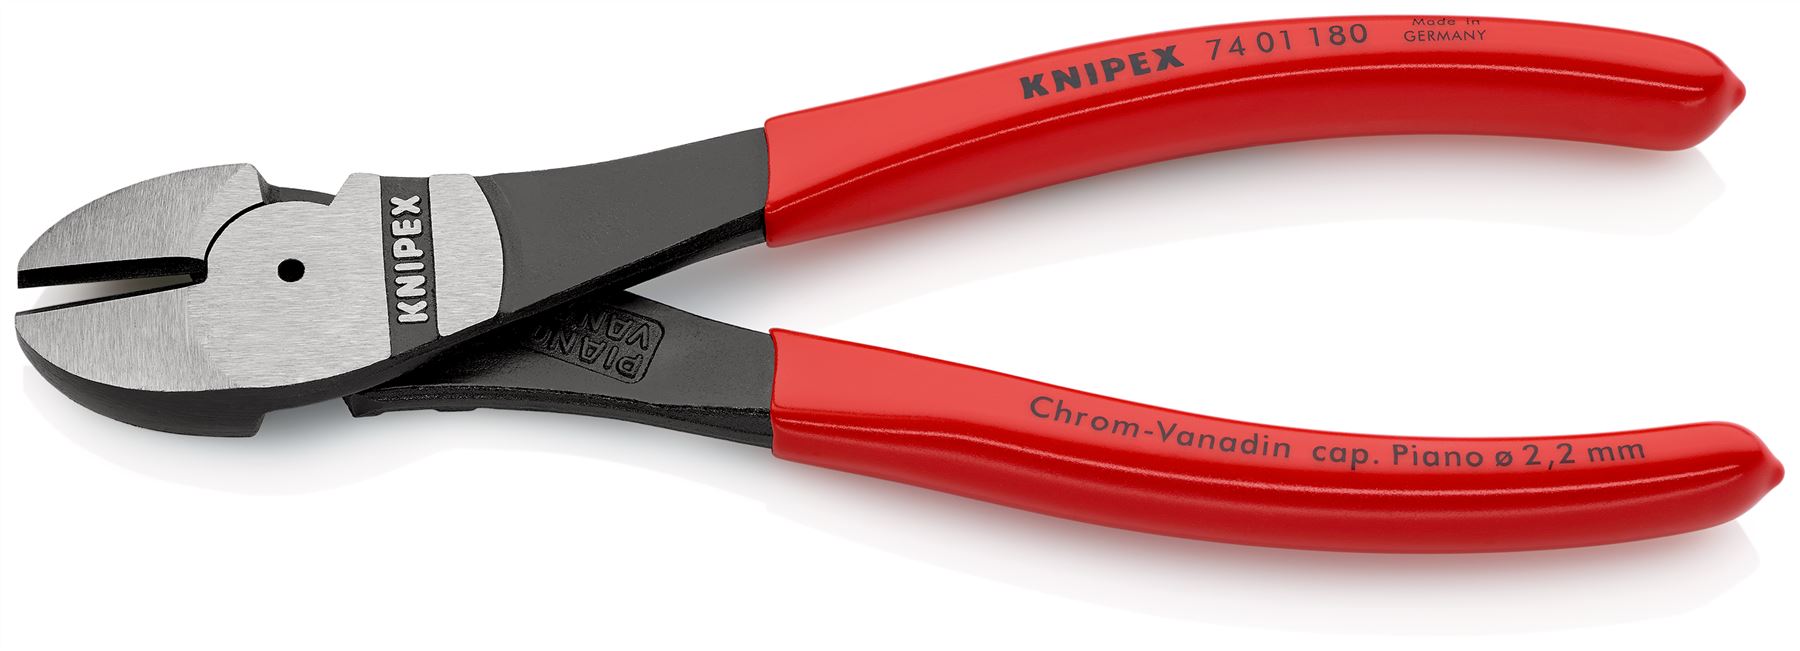 Knipex High Leverage Diagonal Side Cutting Pliers 180mm 74 01 180